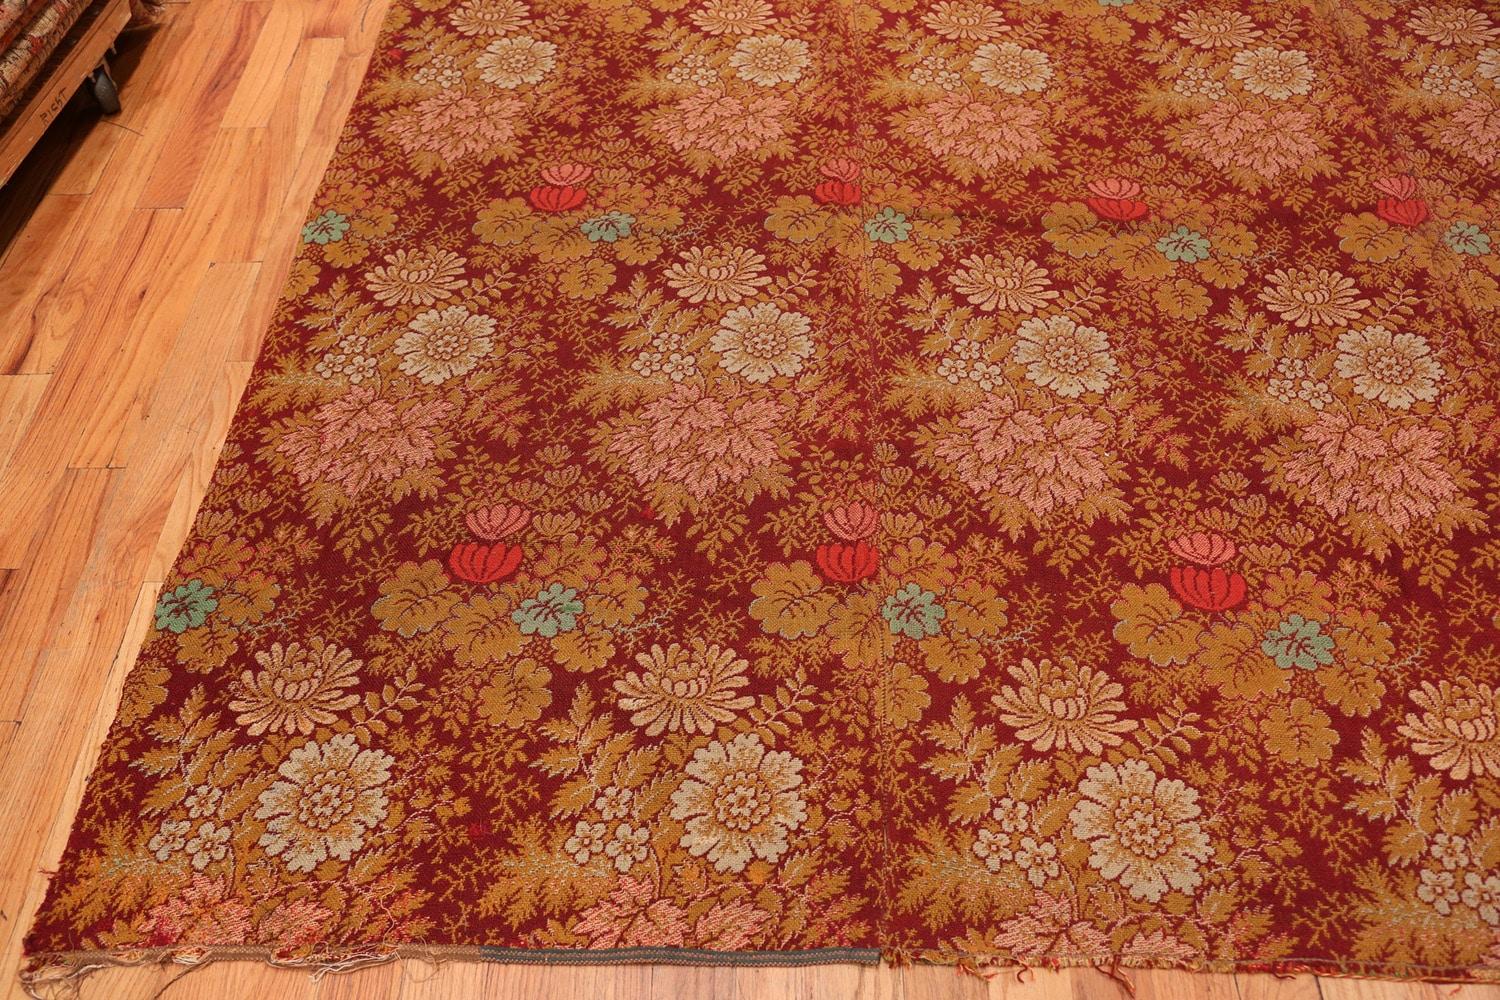 Machine-Made Antique American Ingrain Rug. Size: 11 ft 8 in x 16 ft (3.56 m x 4.88 m)